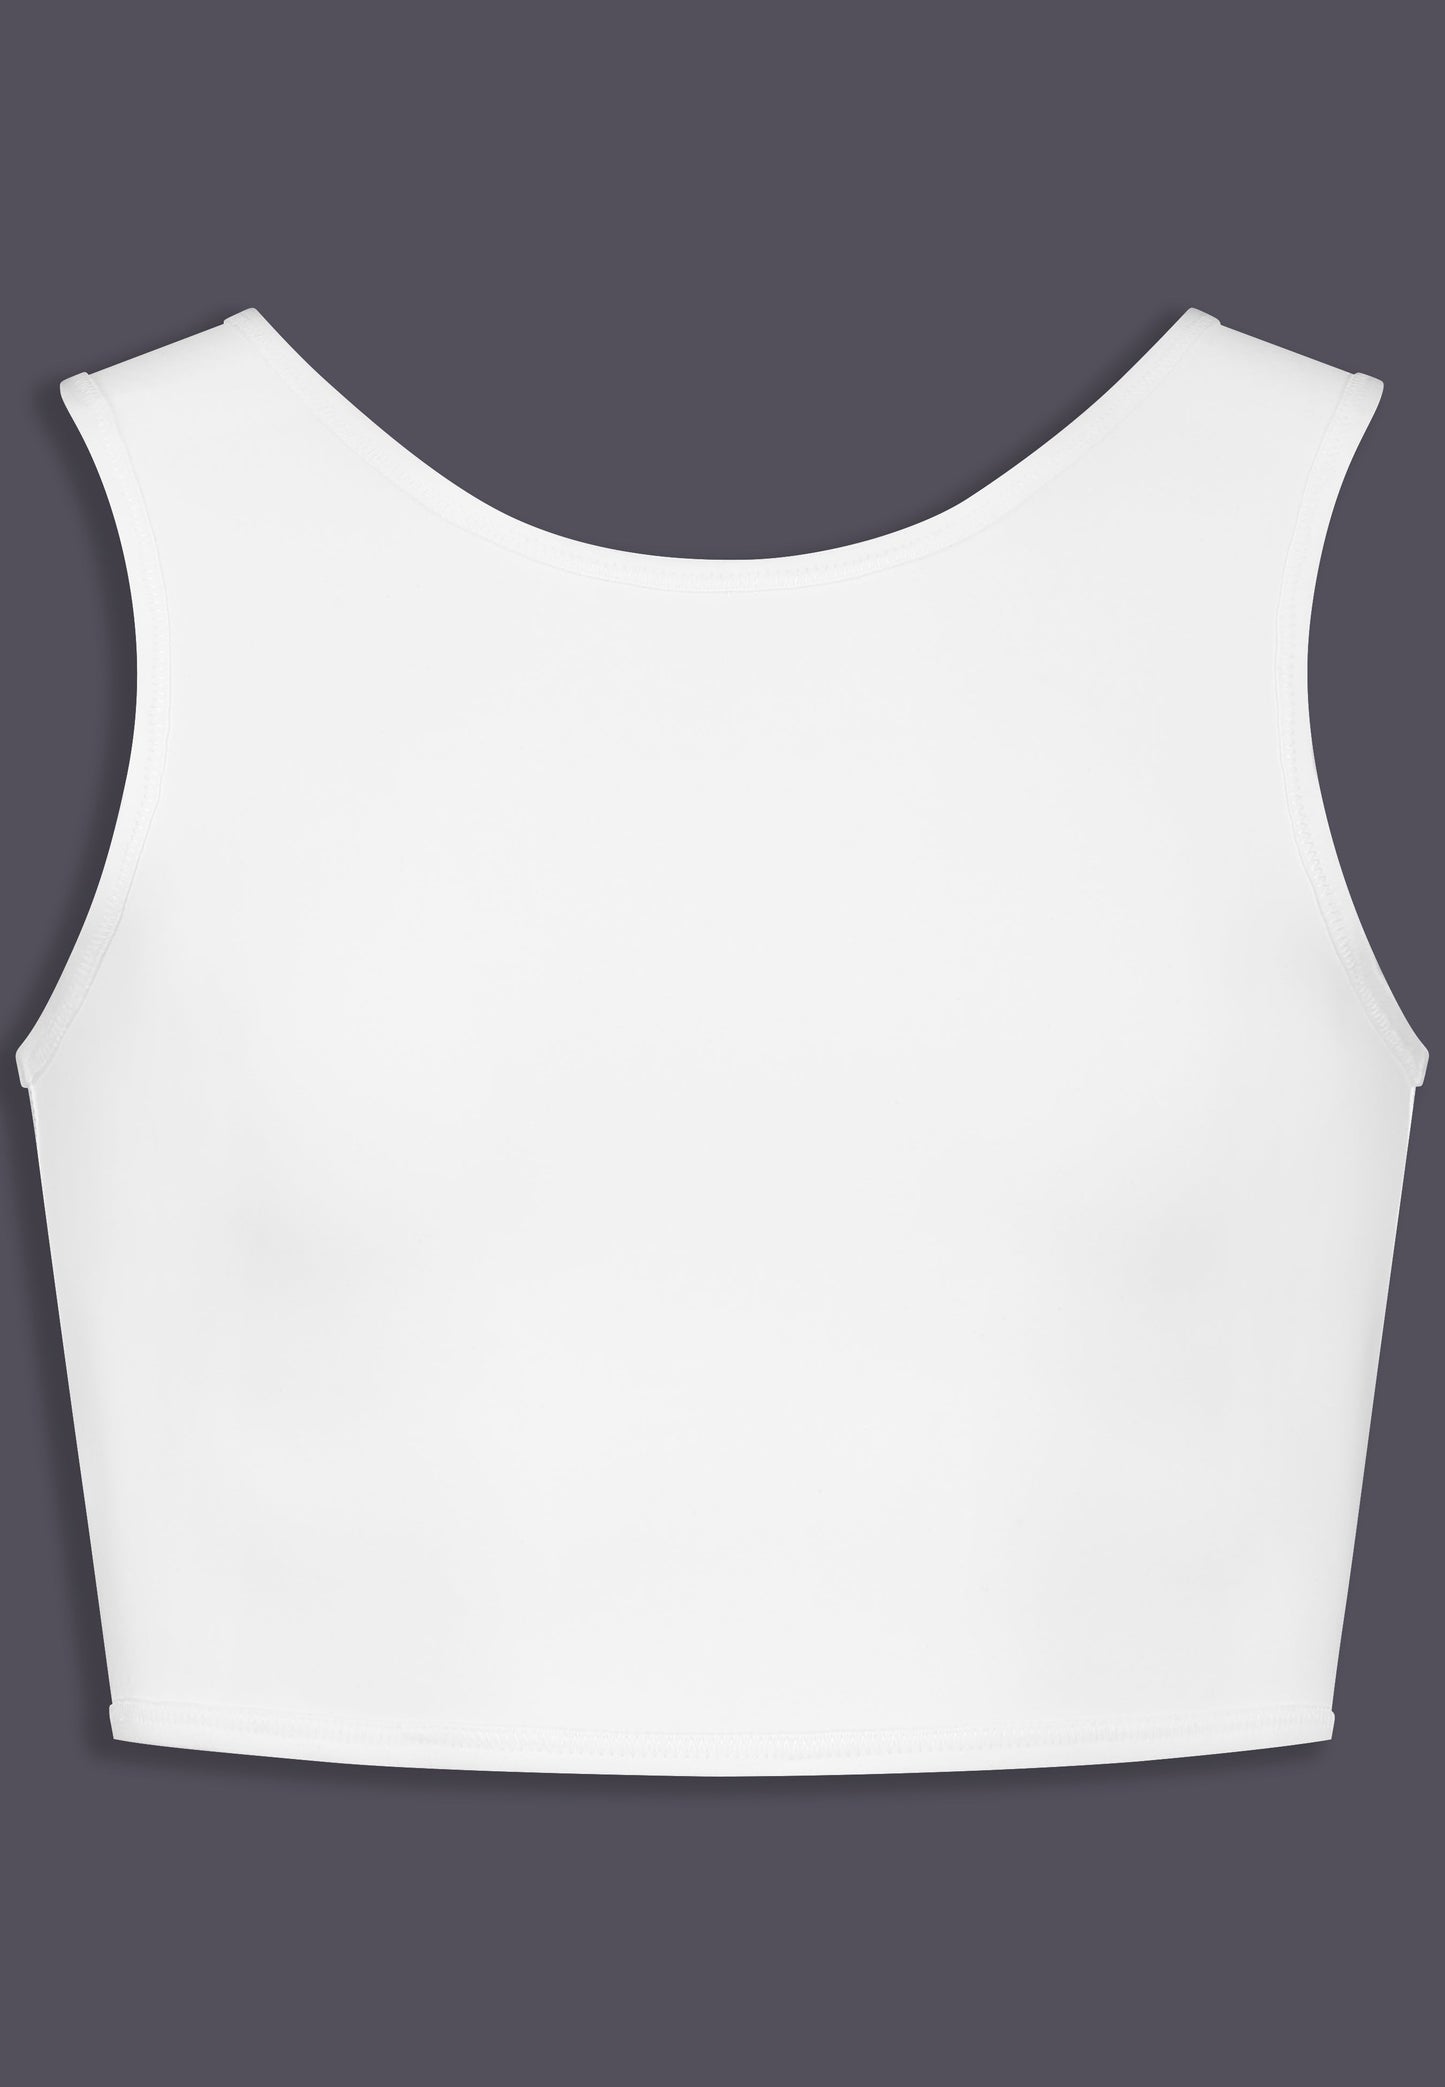 Short Binder - Extra strong, white, front view